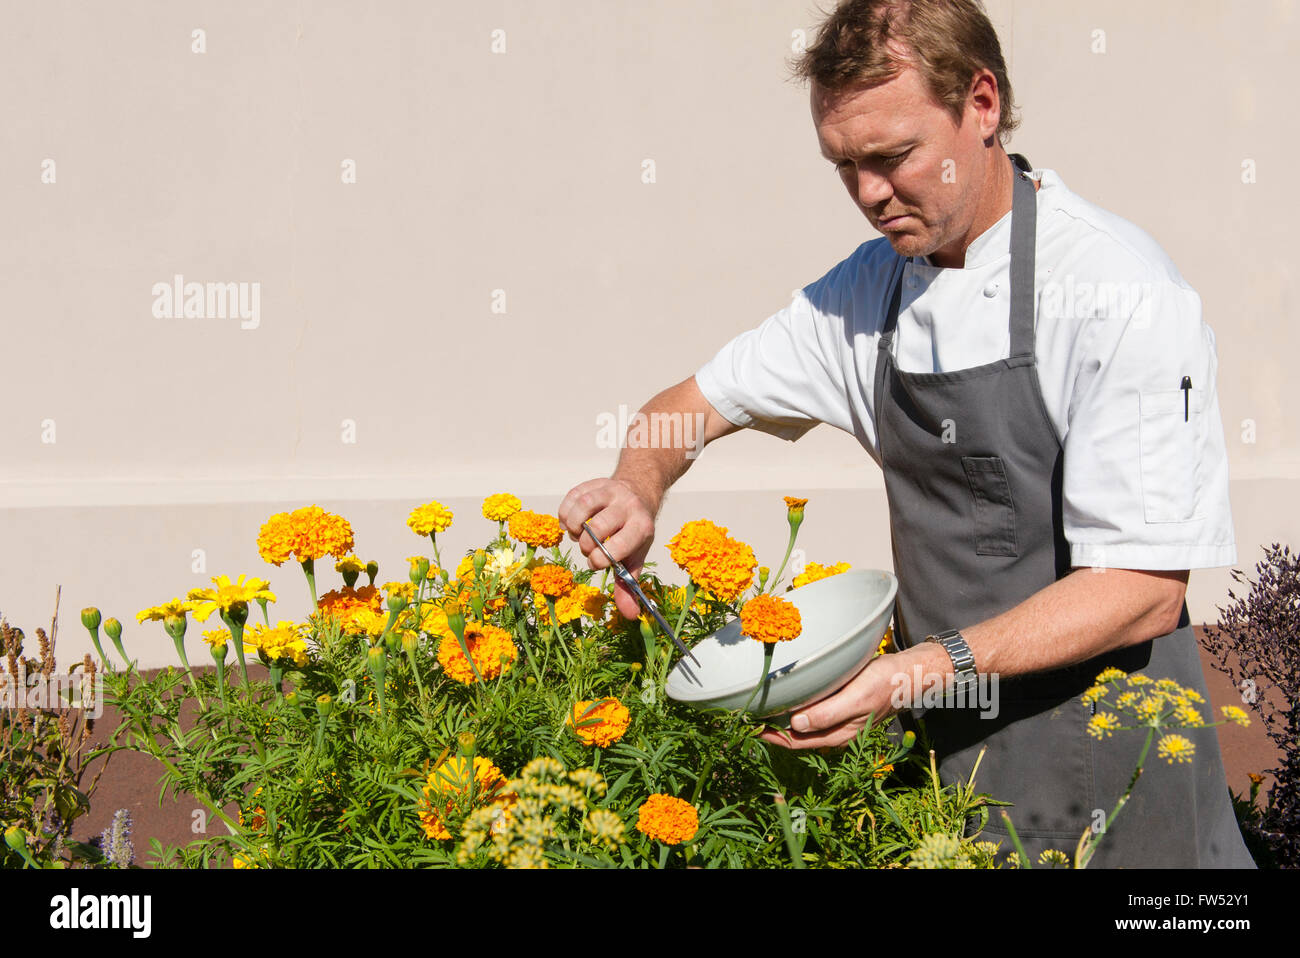 Aaron Carr, head chef at Vasse Felix, is collecting edible flowers to decorate his plates, Margaret River, Western Australia Stock Photo